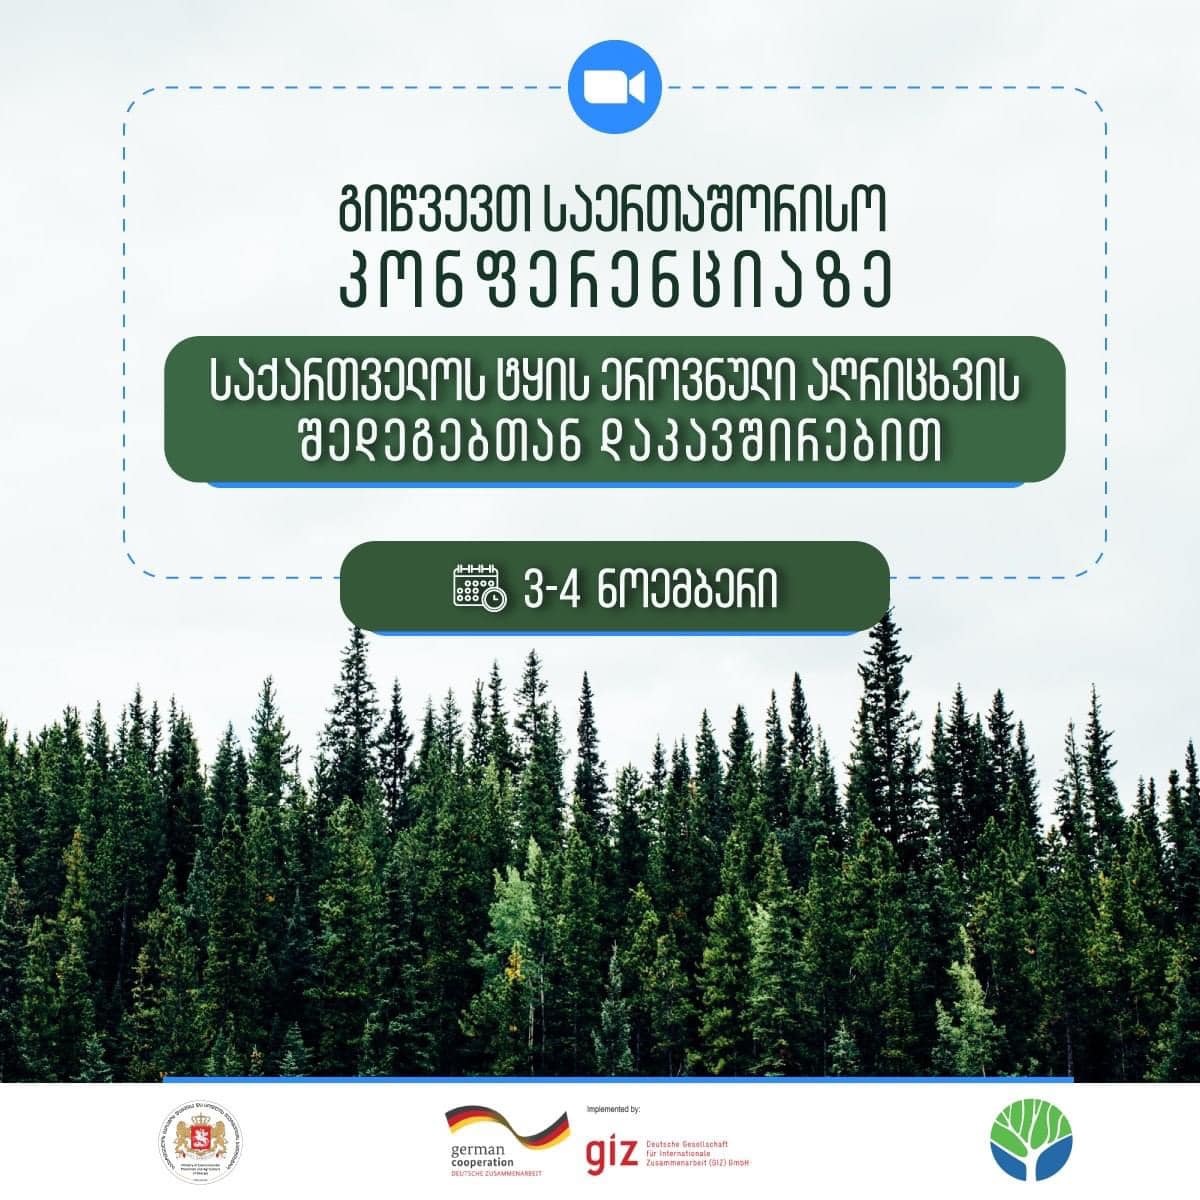 An international conference regarding the first national forest recording was held in Georgia